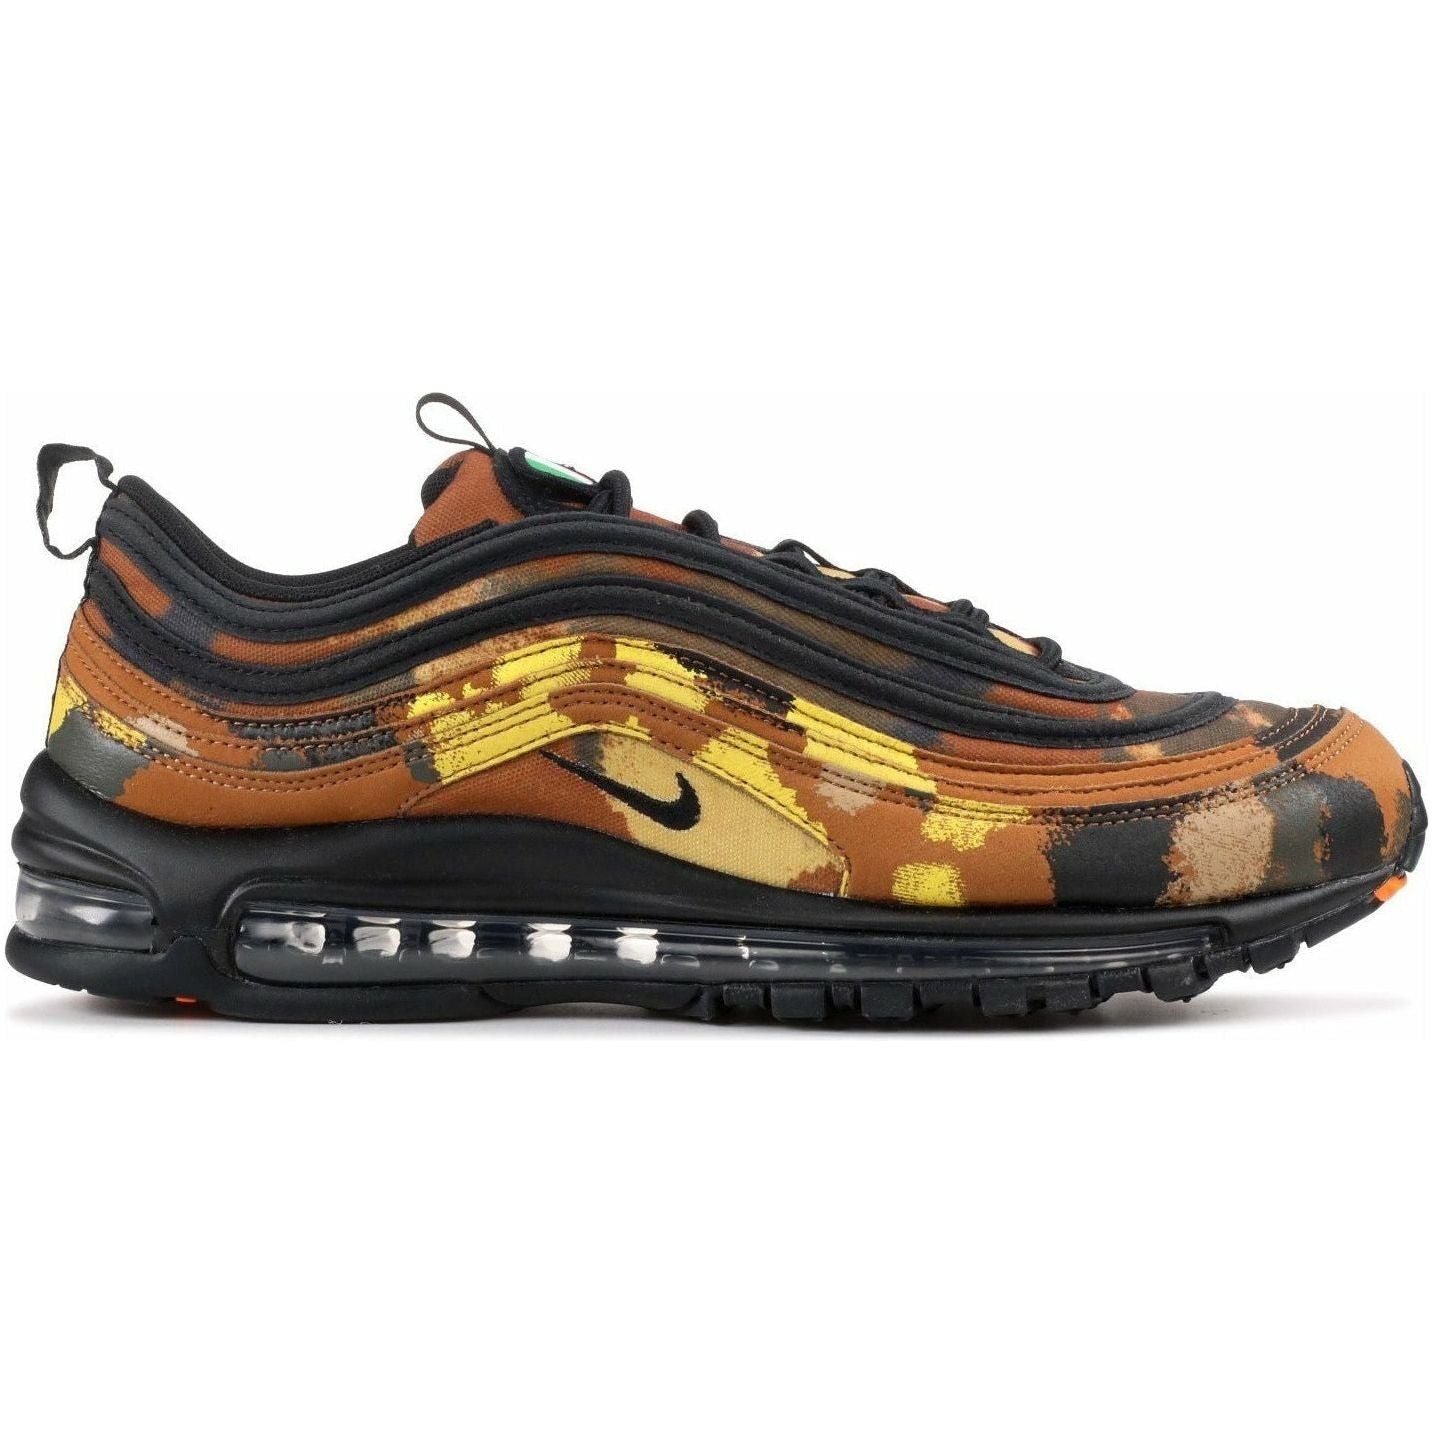 Nike Air Max 97 Country Camo Italy from Nike